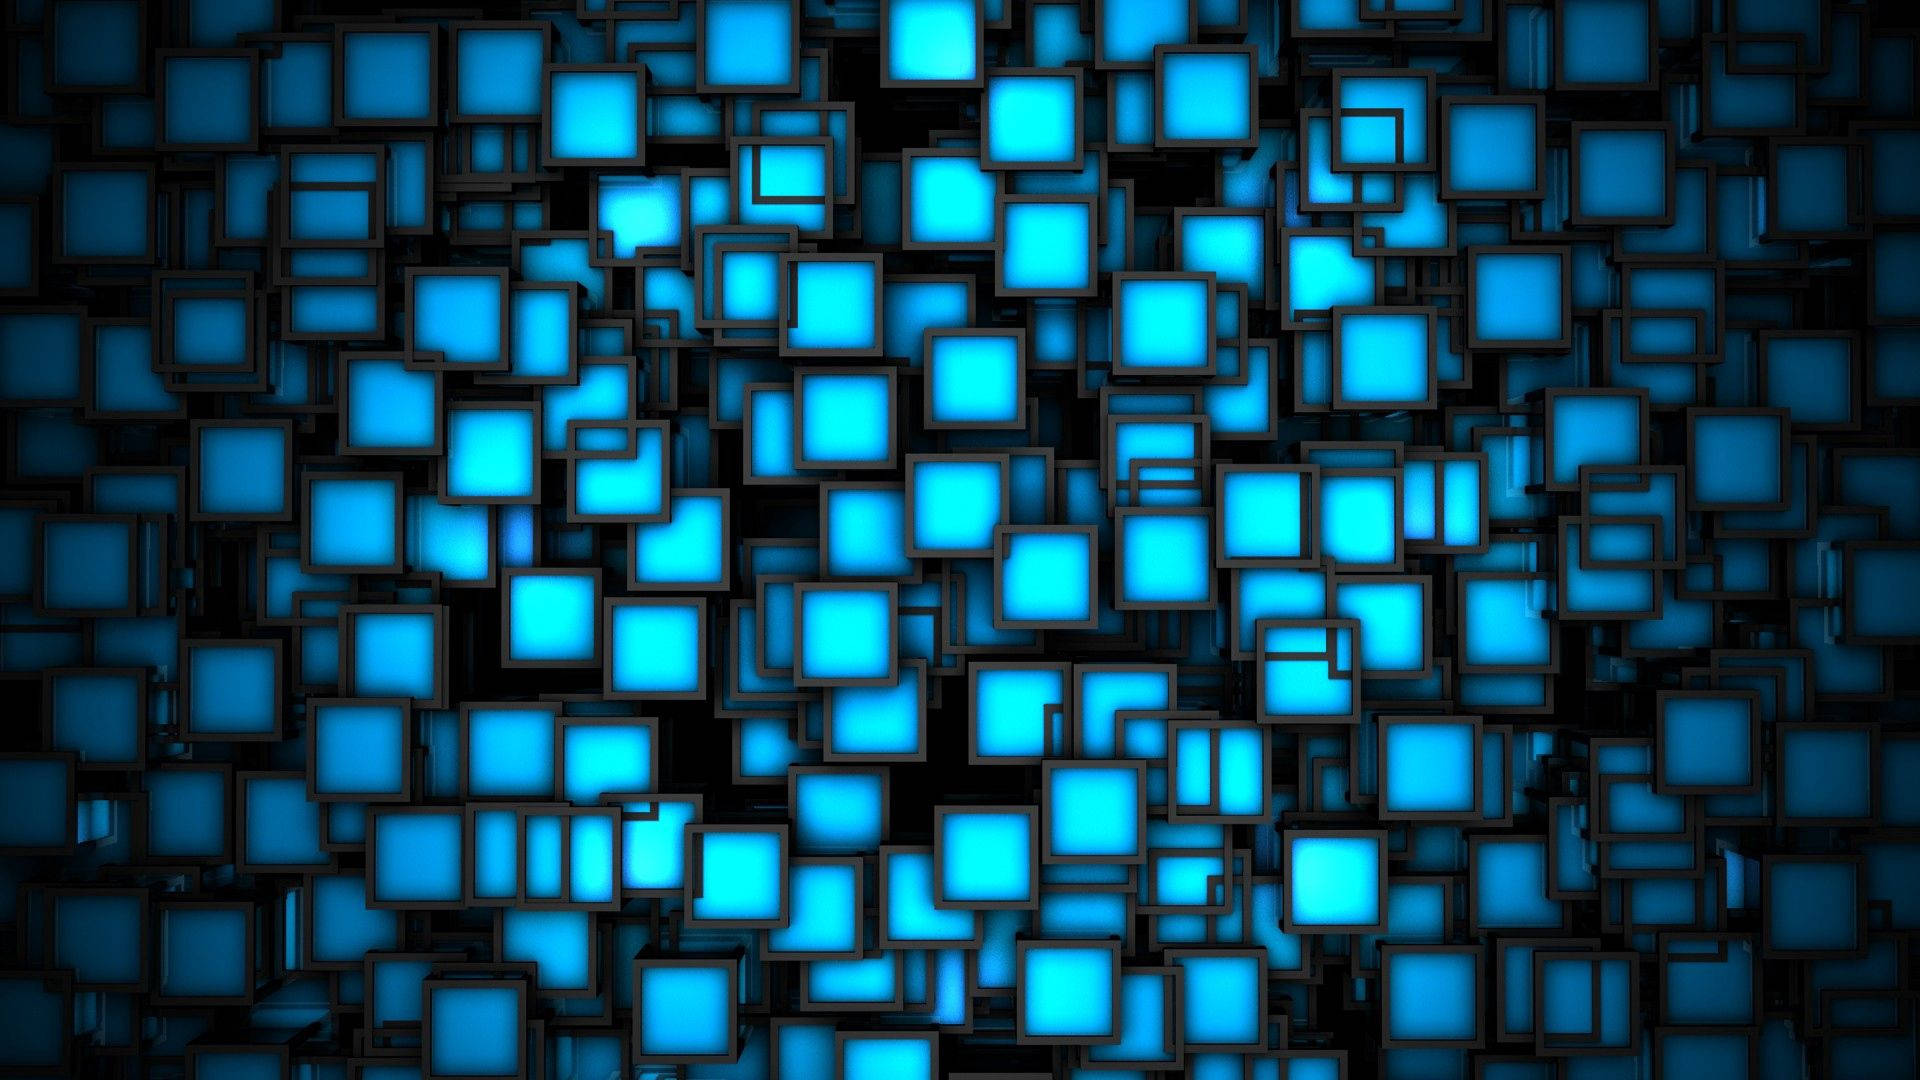 Blue 1920X1080 Wallpaper and Background Image